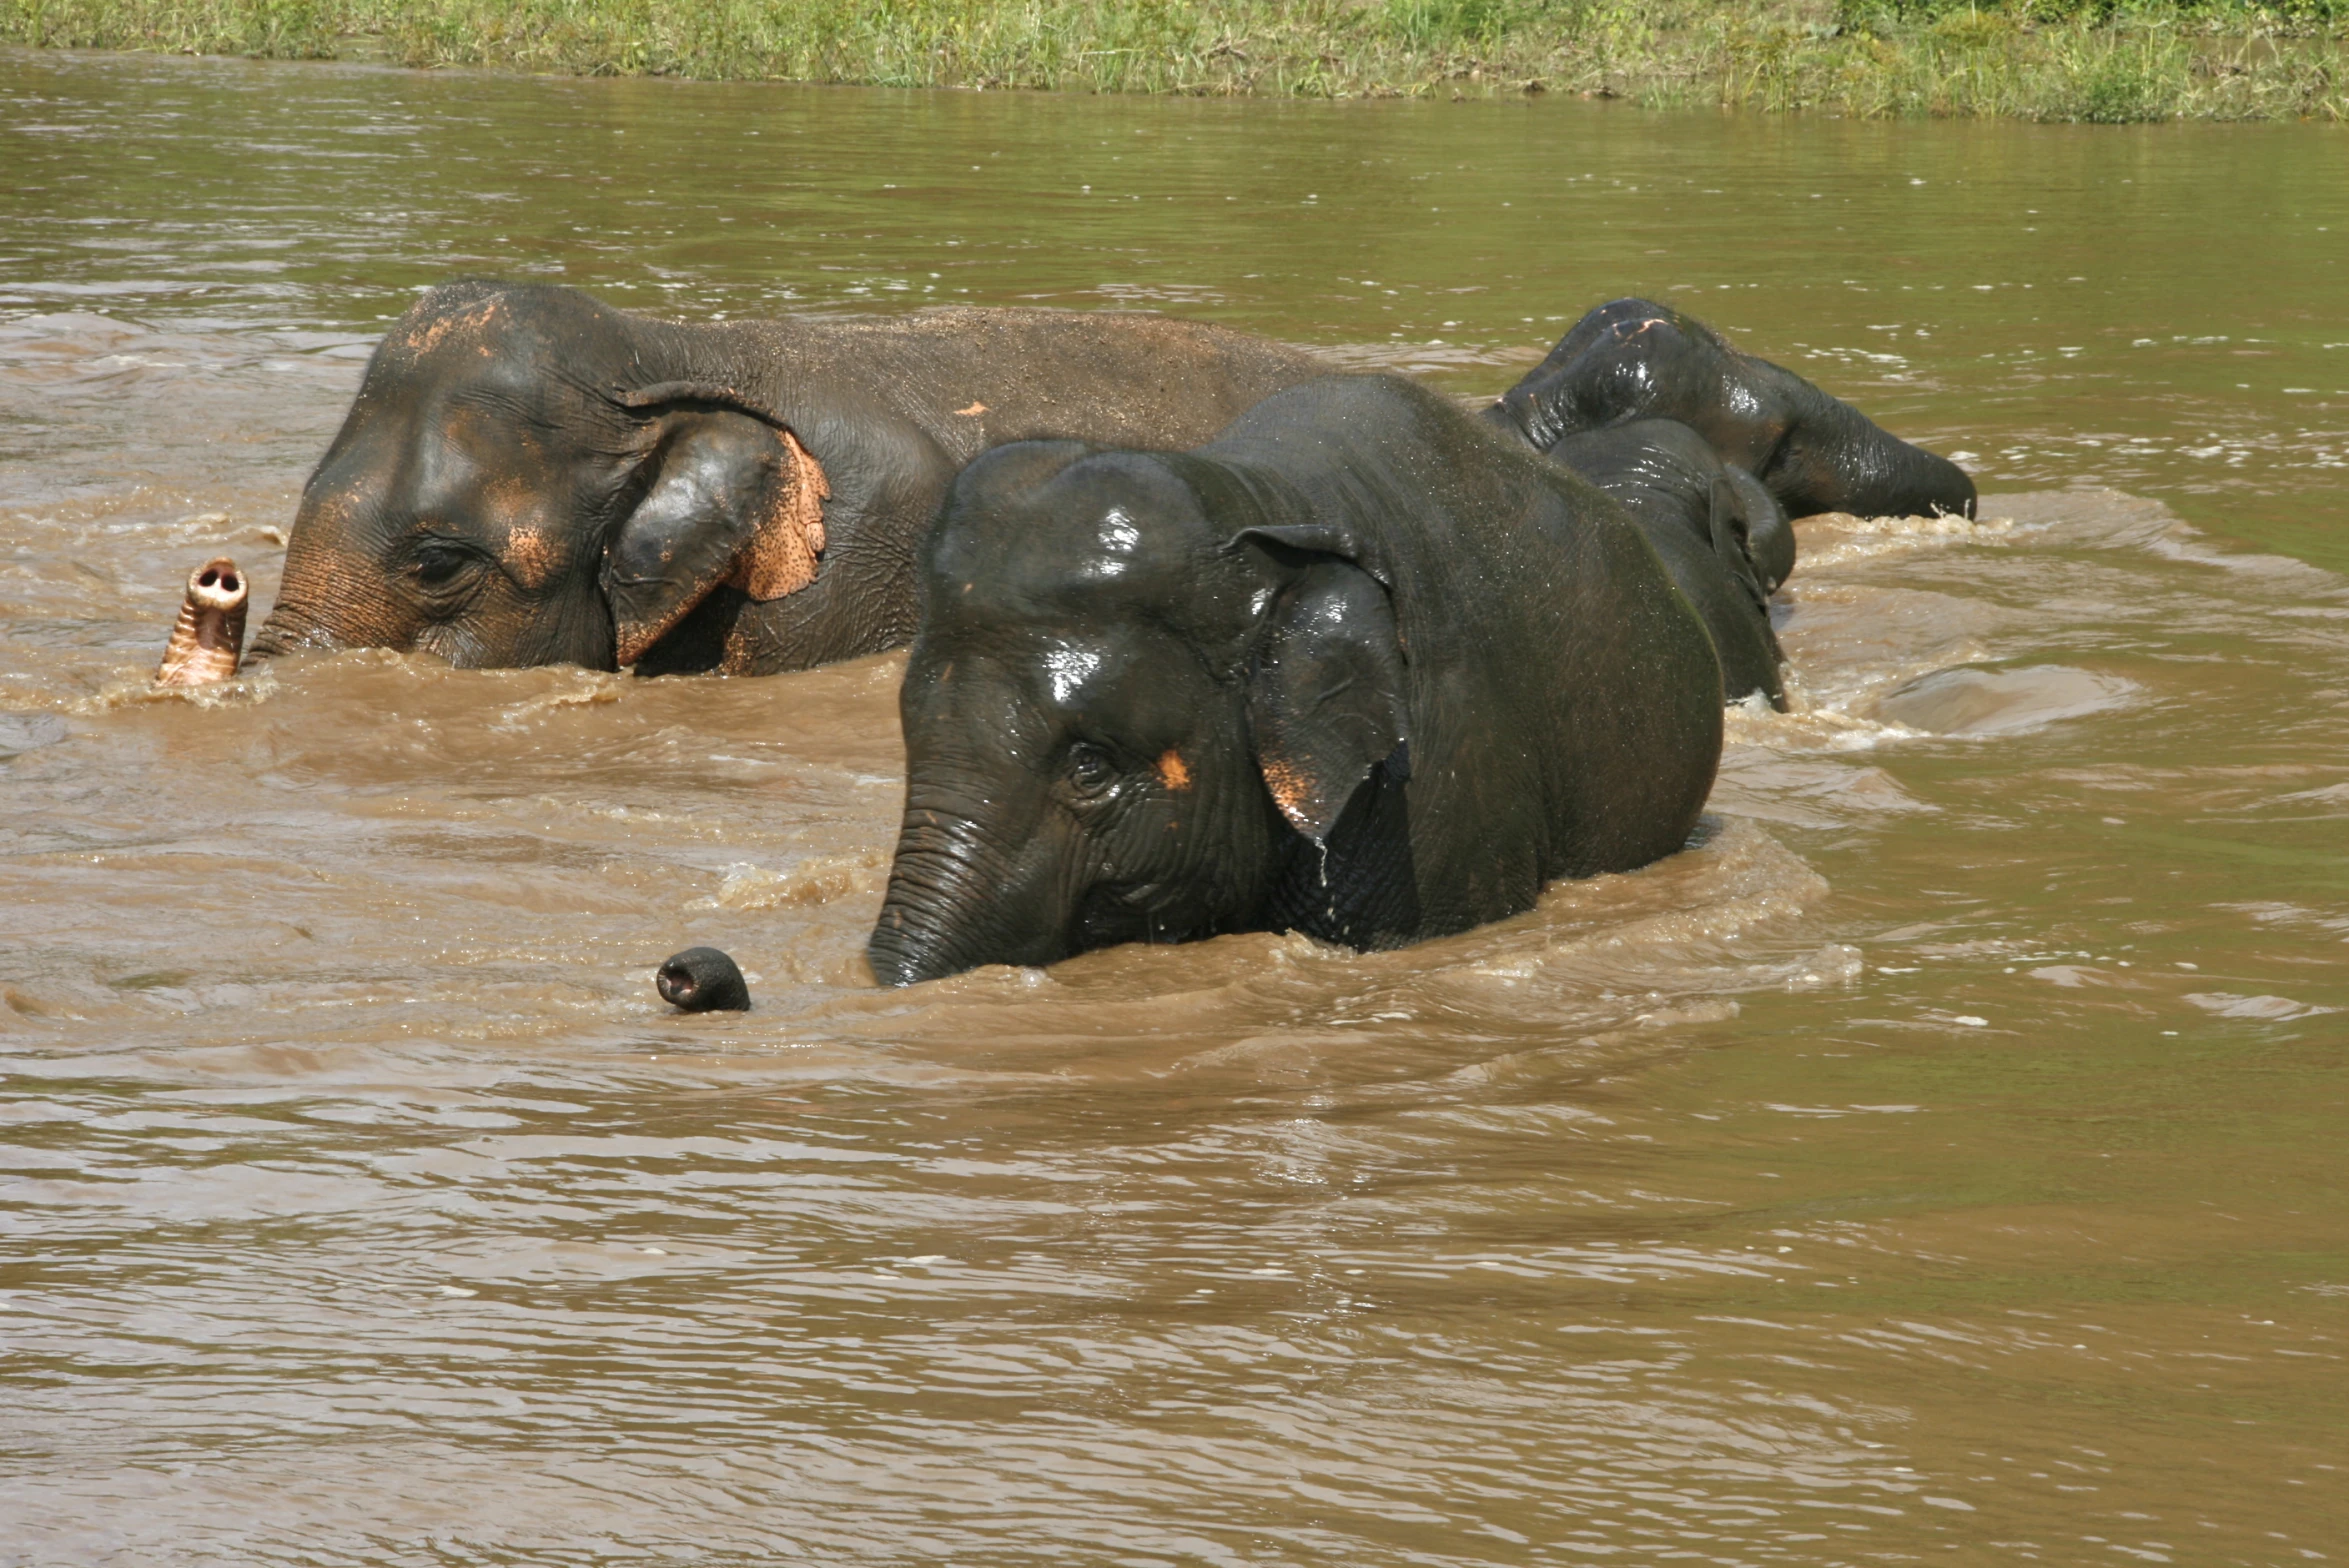 three elephants playing in a dirty river, with one another